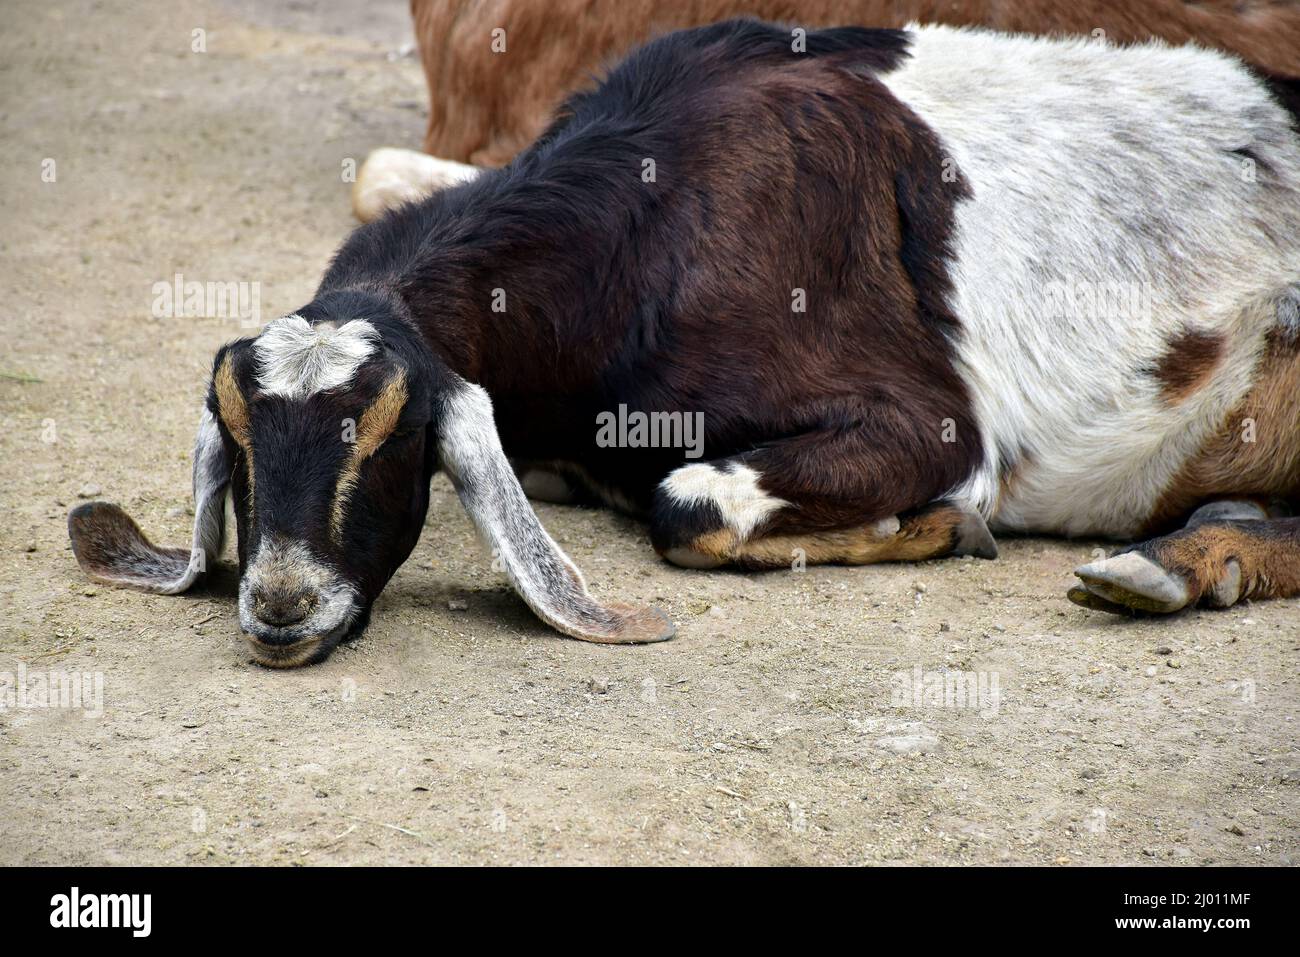 Black, Brown and White Goat with Long Ears Lying Down with its Chin on the Ground Stock Photo